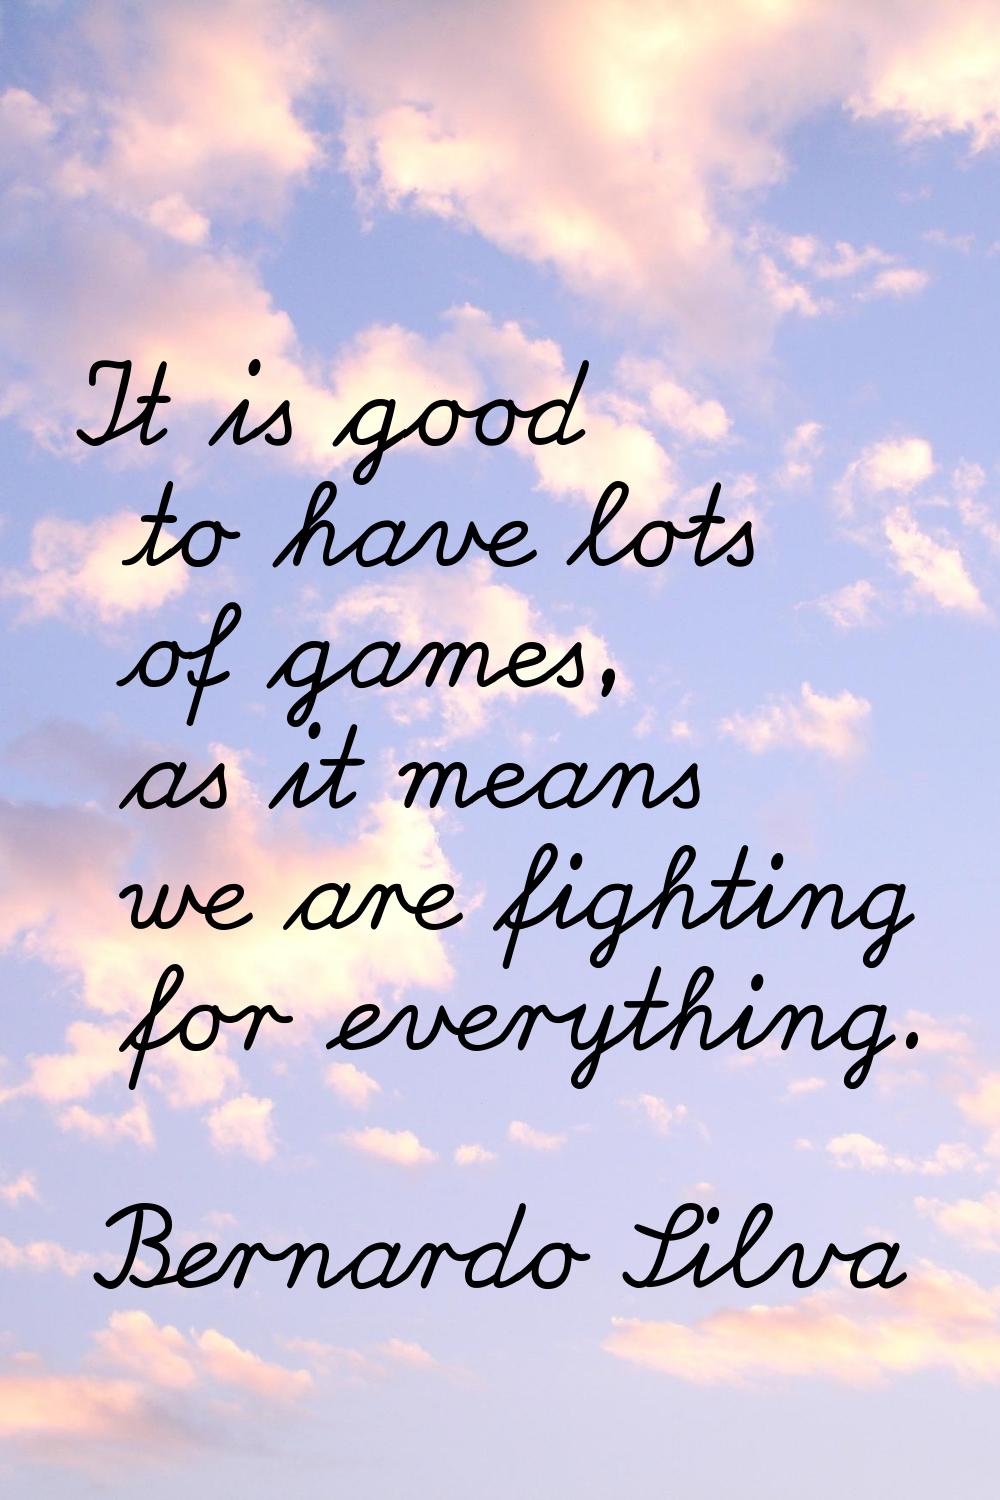 It is good to have lots of games, as it means we are fighting for everything.